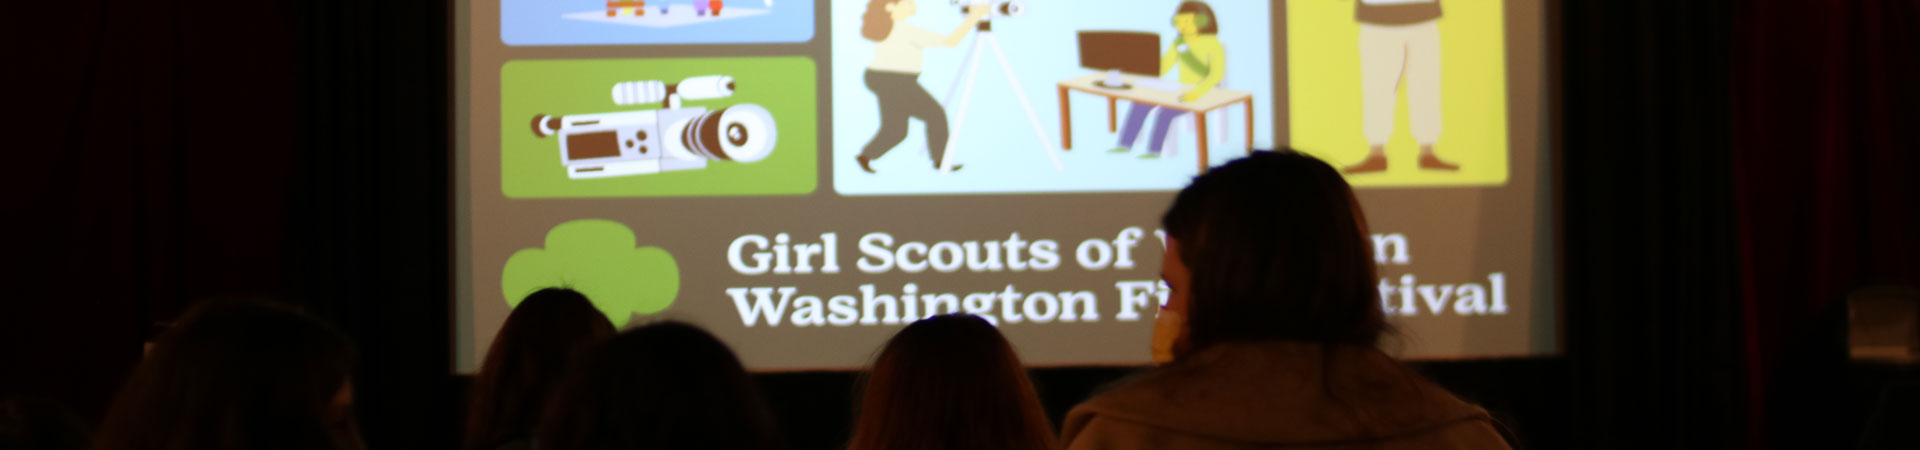  A theater is filled with seated movie-goers. There is a movie screen showing a still of various illustrations of Girl Scouts and filmmaking equipment and the words, "Girl Scouts of Western Washington Film Festival."  